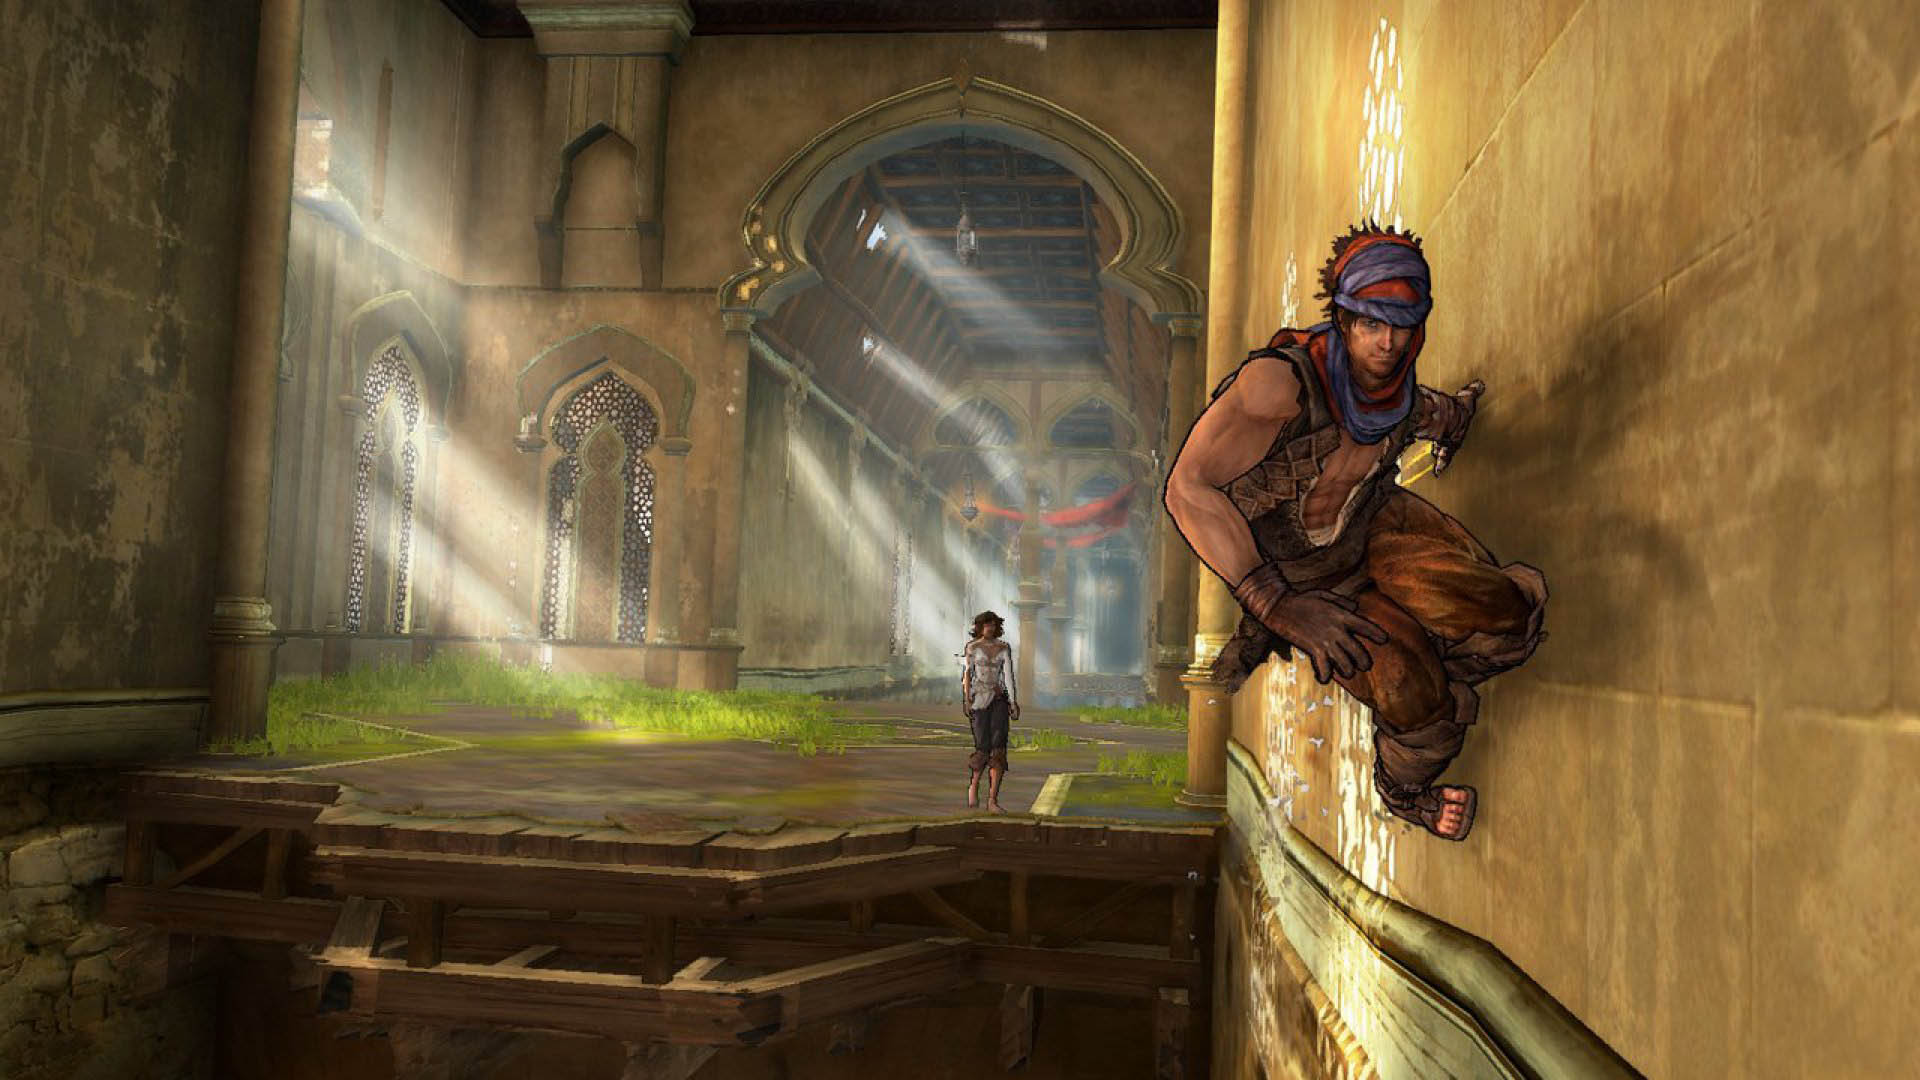 Prince of Persia - The most recent games - Ancient World Magazine